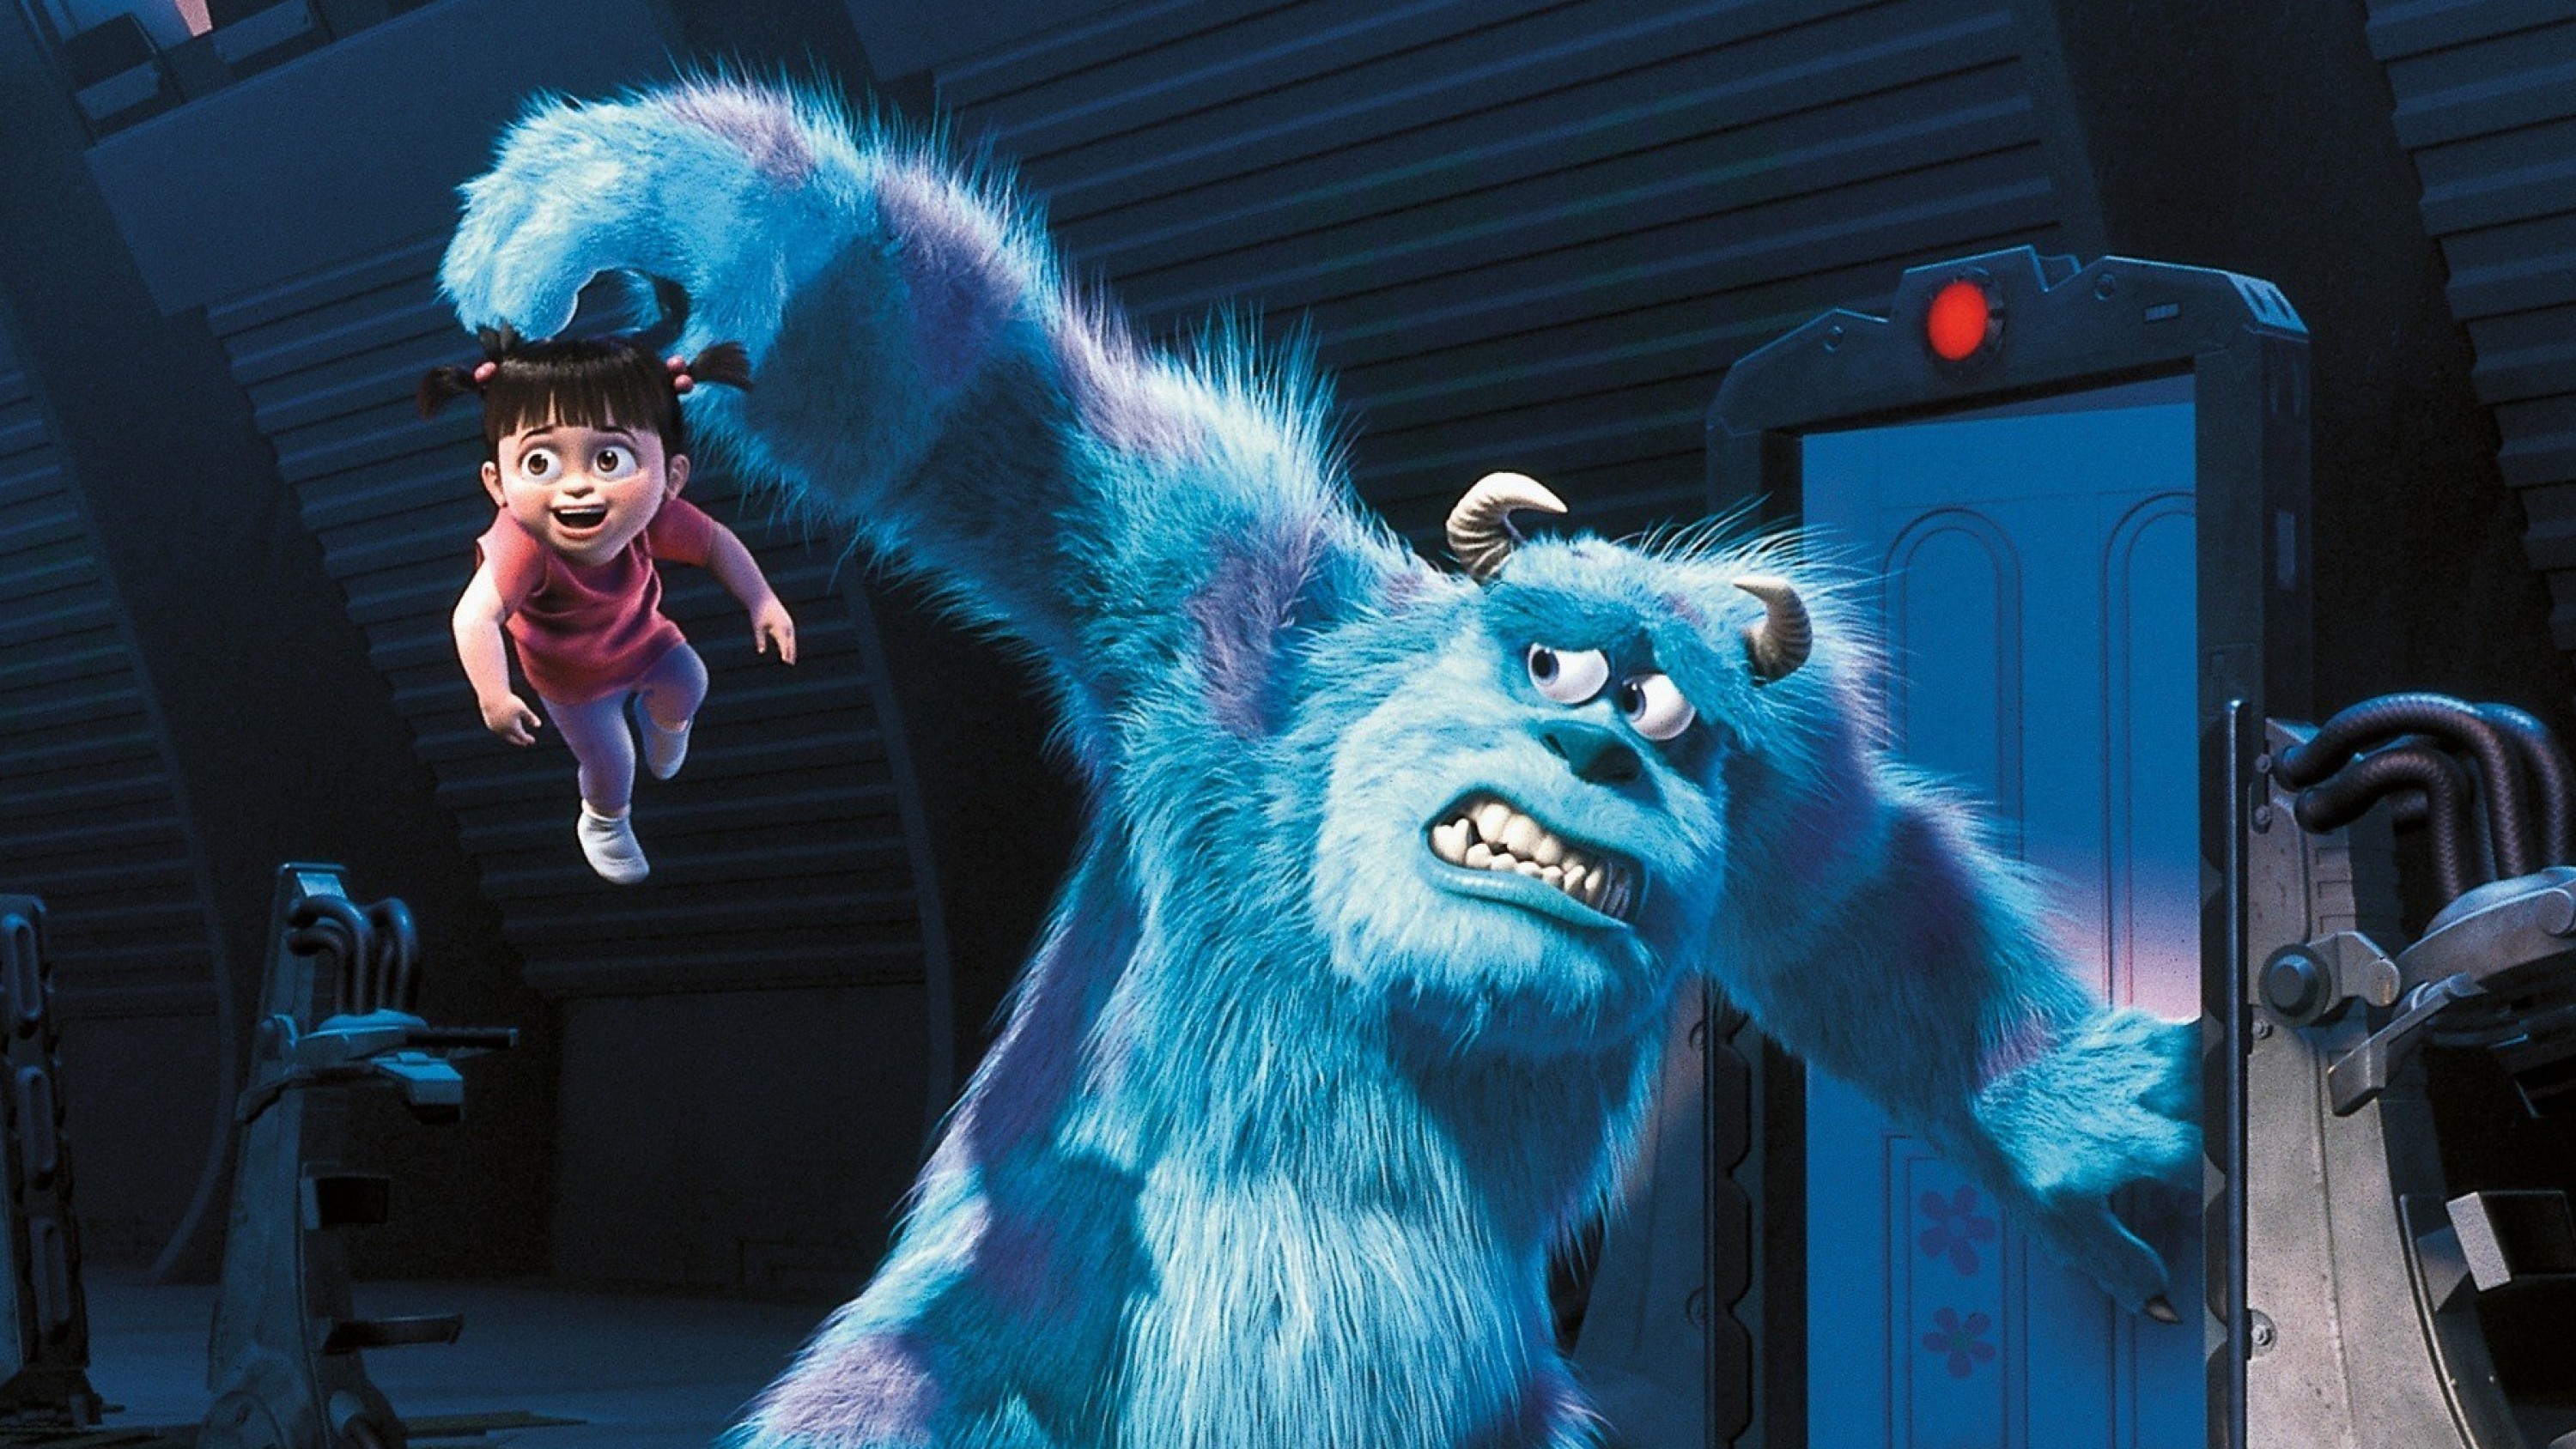 Resource - Monsters, Inc.: Film Guide - Into Film